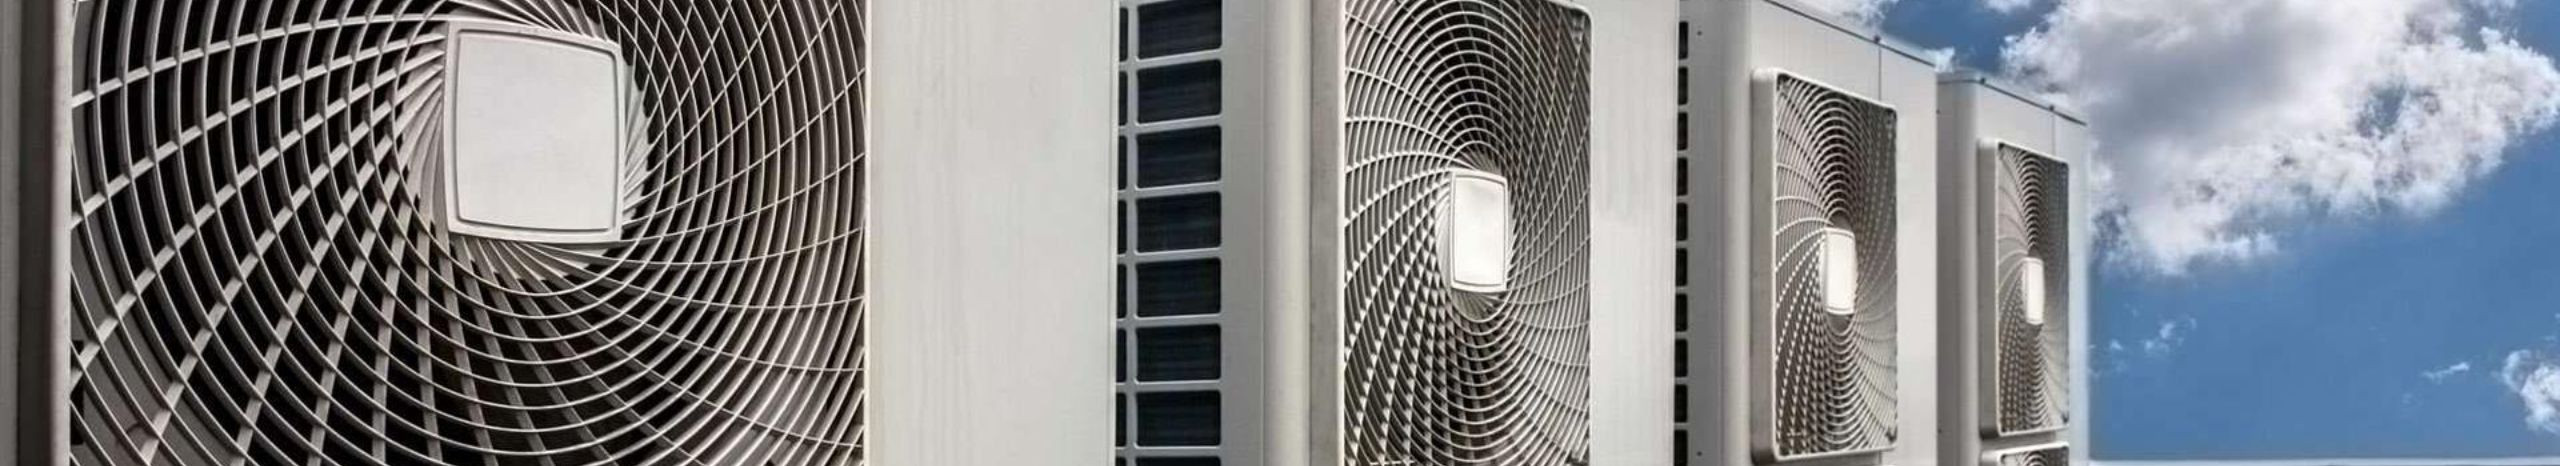 air to water heat pumps, humidifiers, energy, Gas boilers, heat pump, air water heat pumps, heat pumps, ground source heat pump, Tartu County, air to air heat pumps